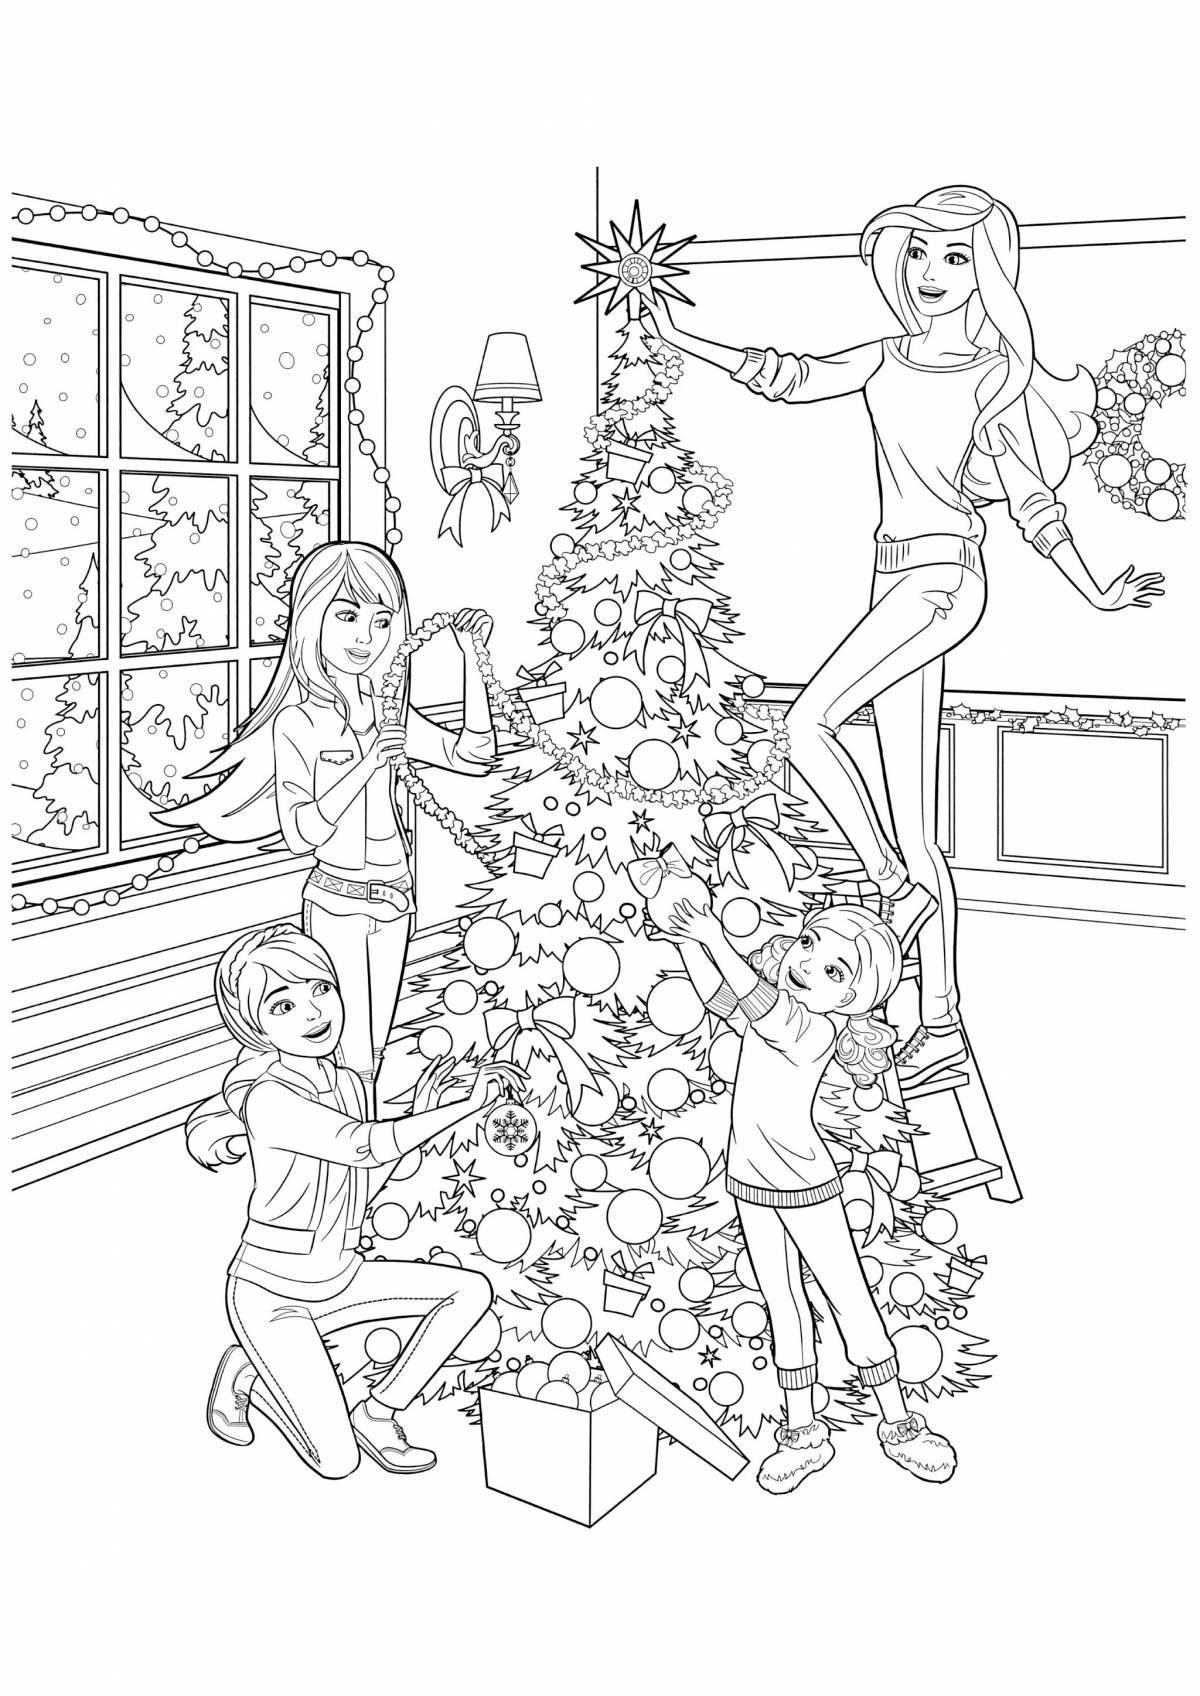 Glorious new year family coloring book